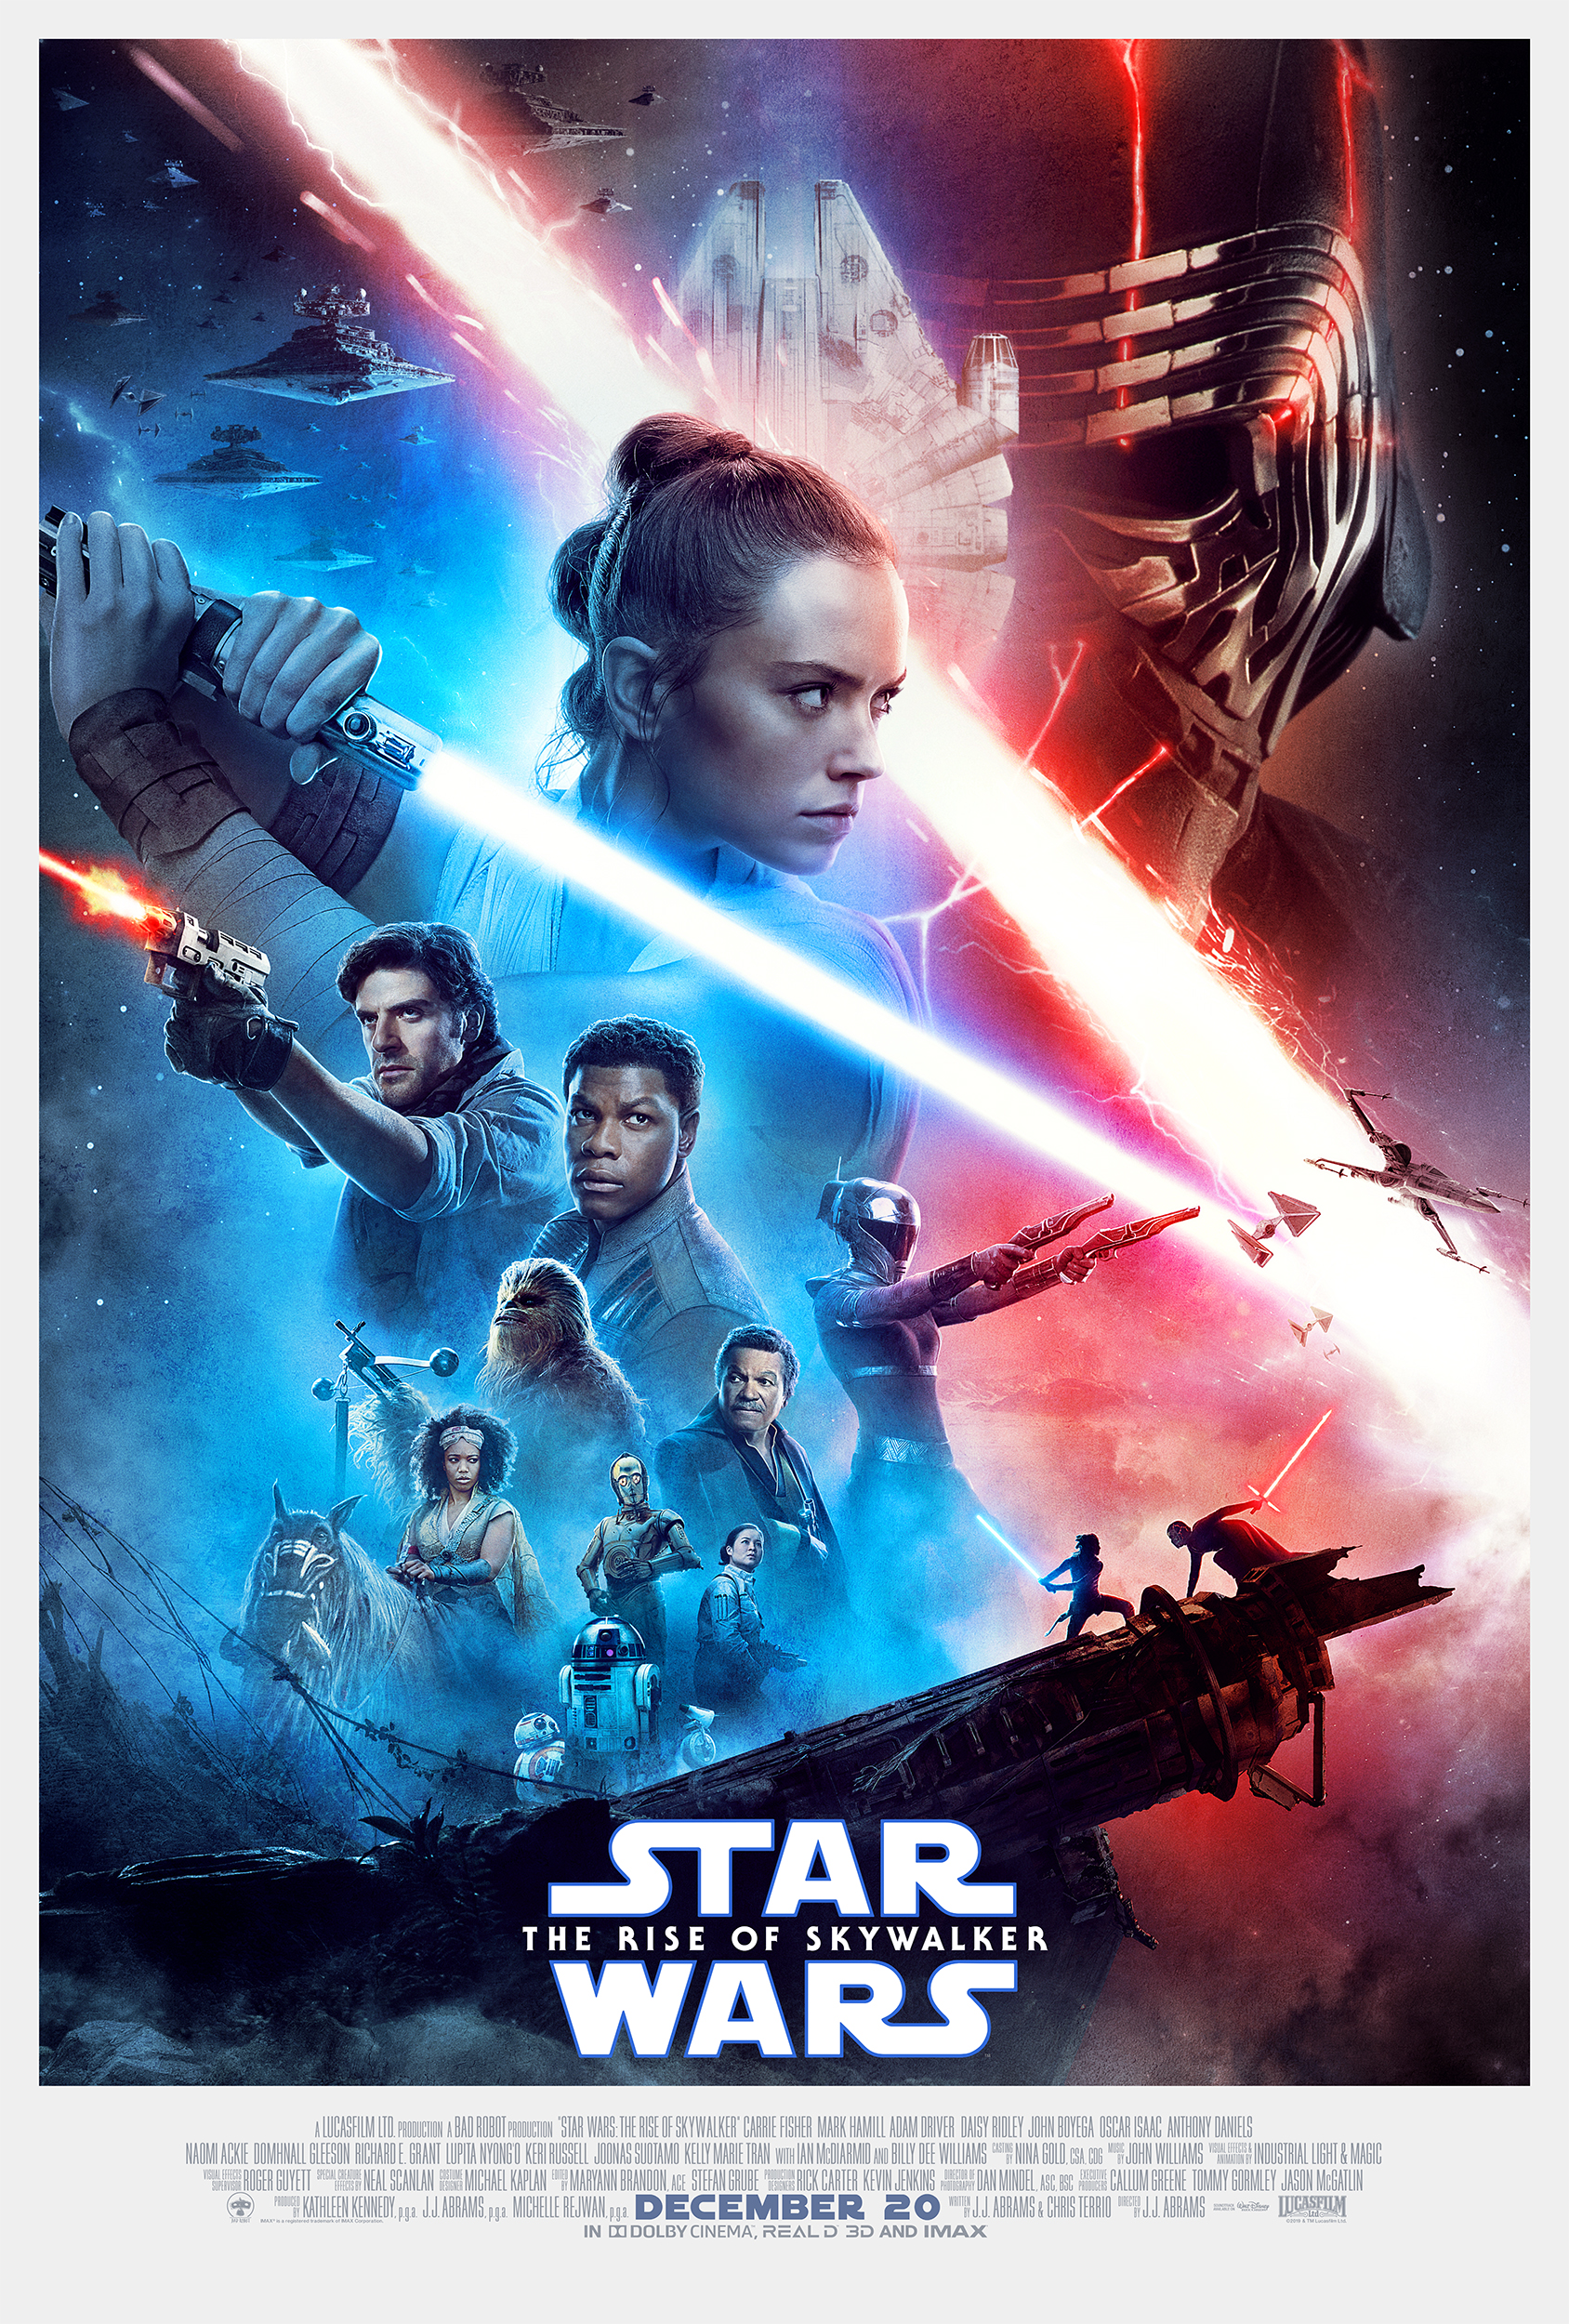 Star Wars: The Rise Of Skywalker Final Trailer, Poster & Tickets Now On Sale